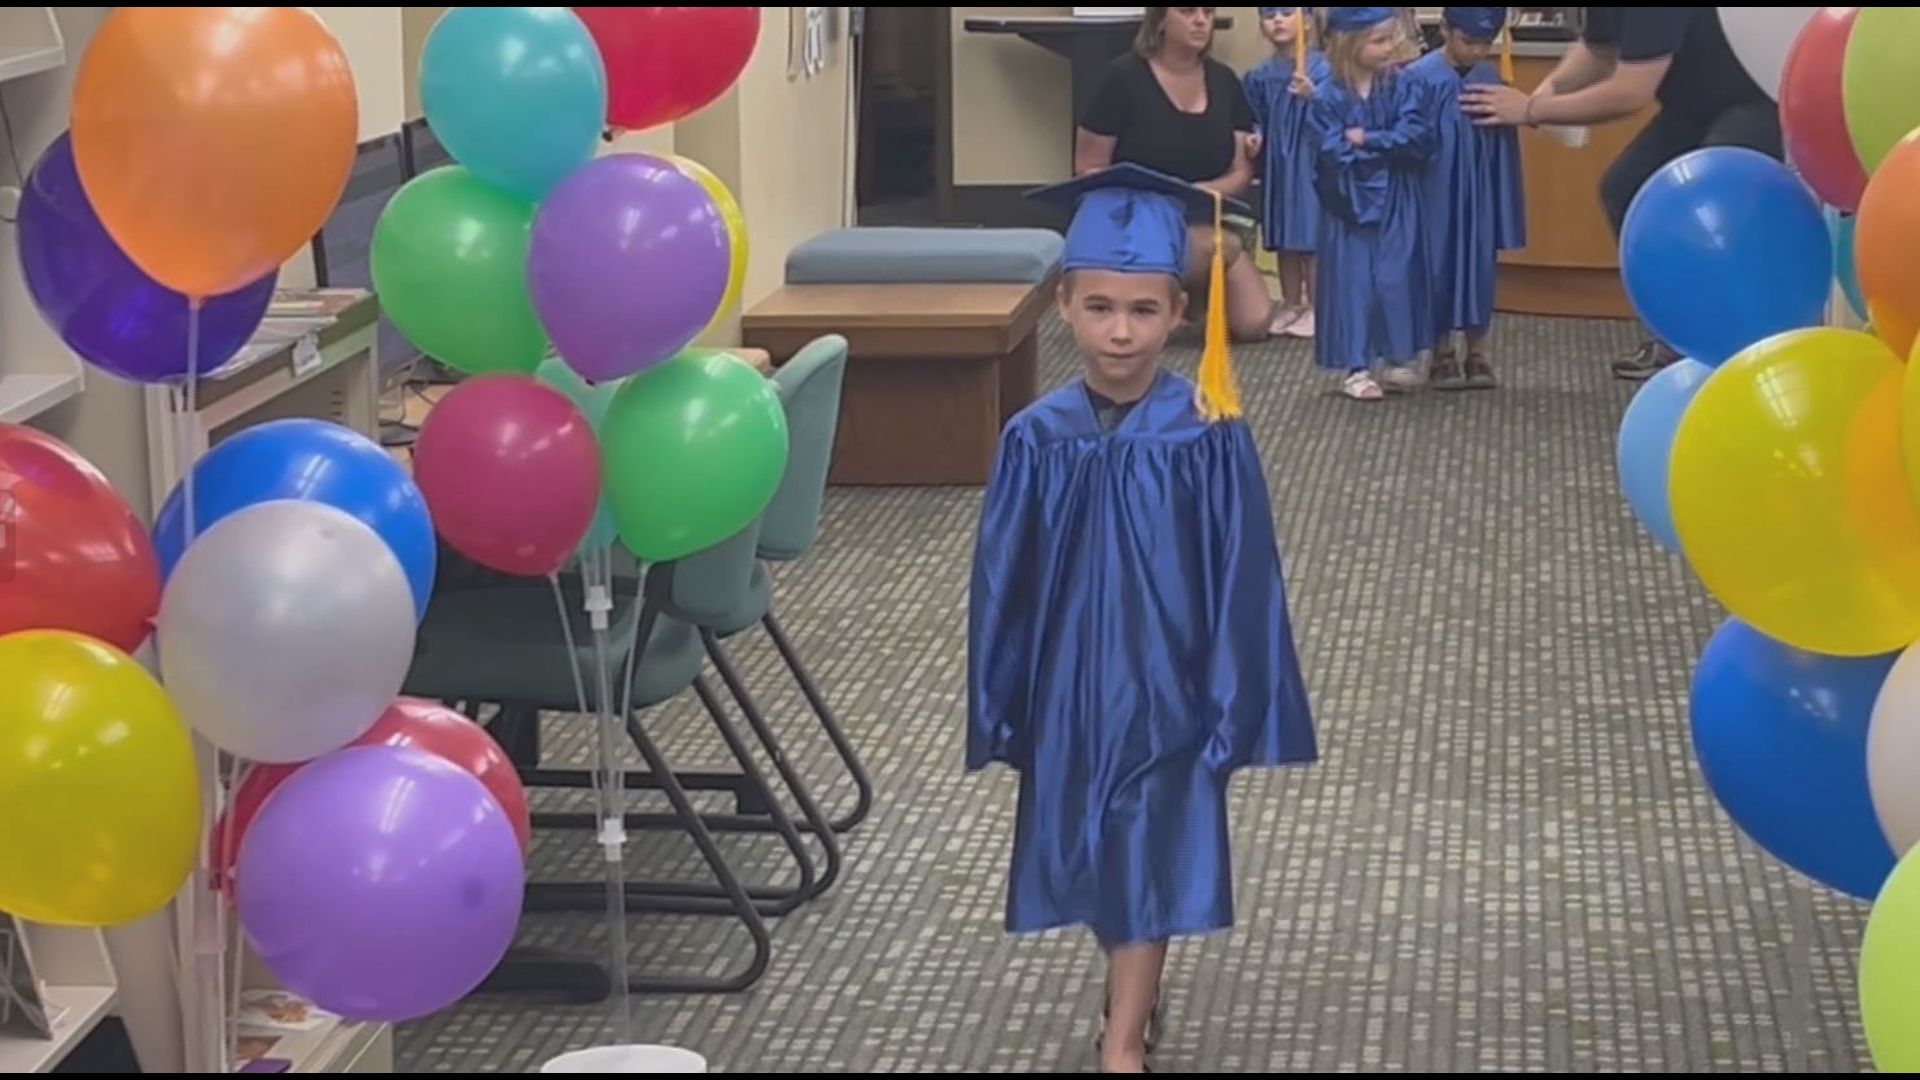 Children who met their reading goals in the 1KB4K program got to walk in their cap and gowns and get a certificate of completion.